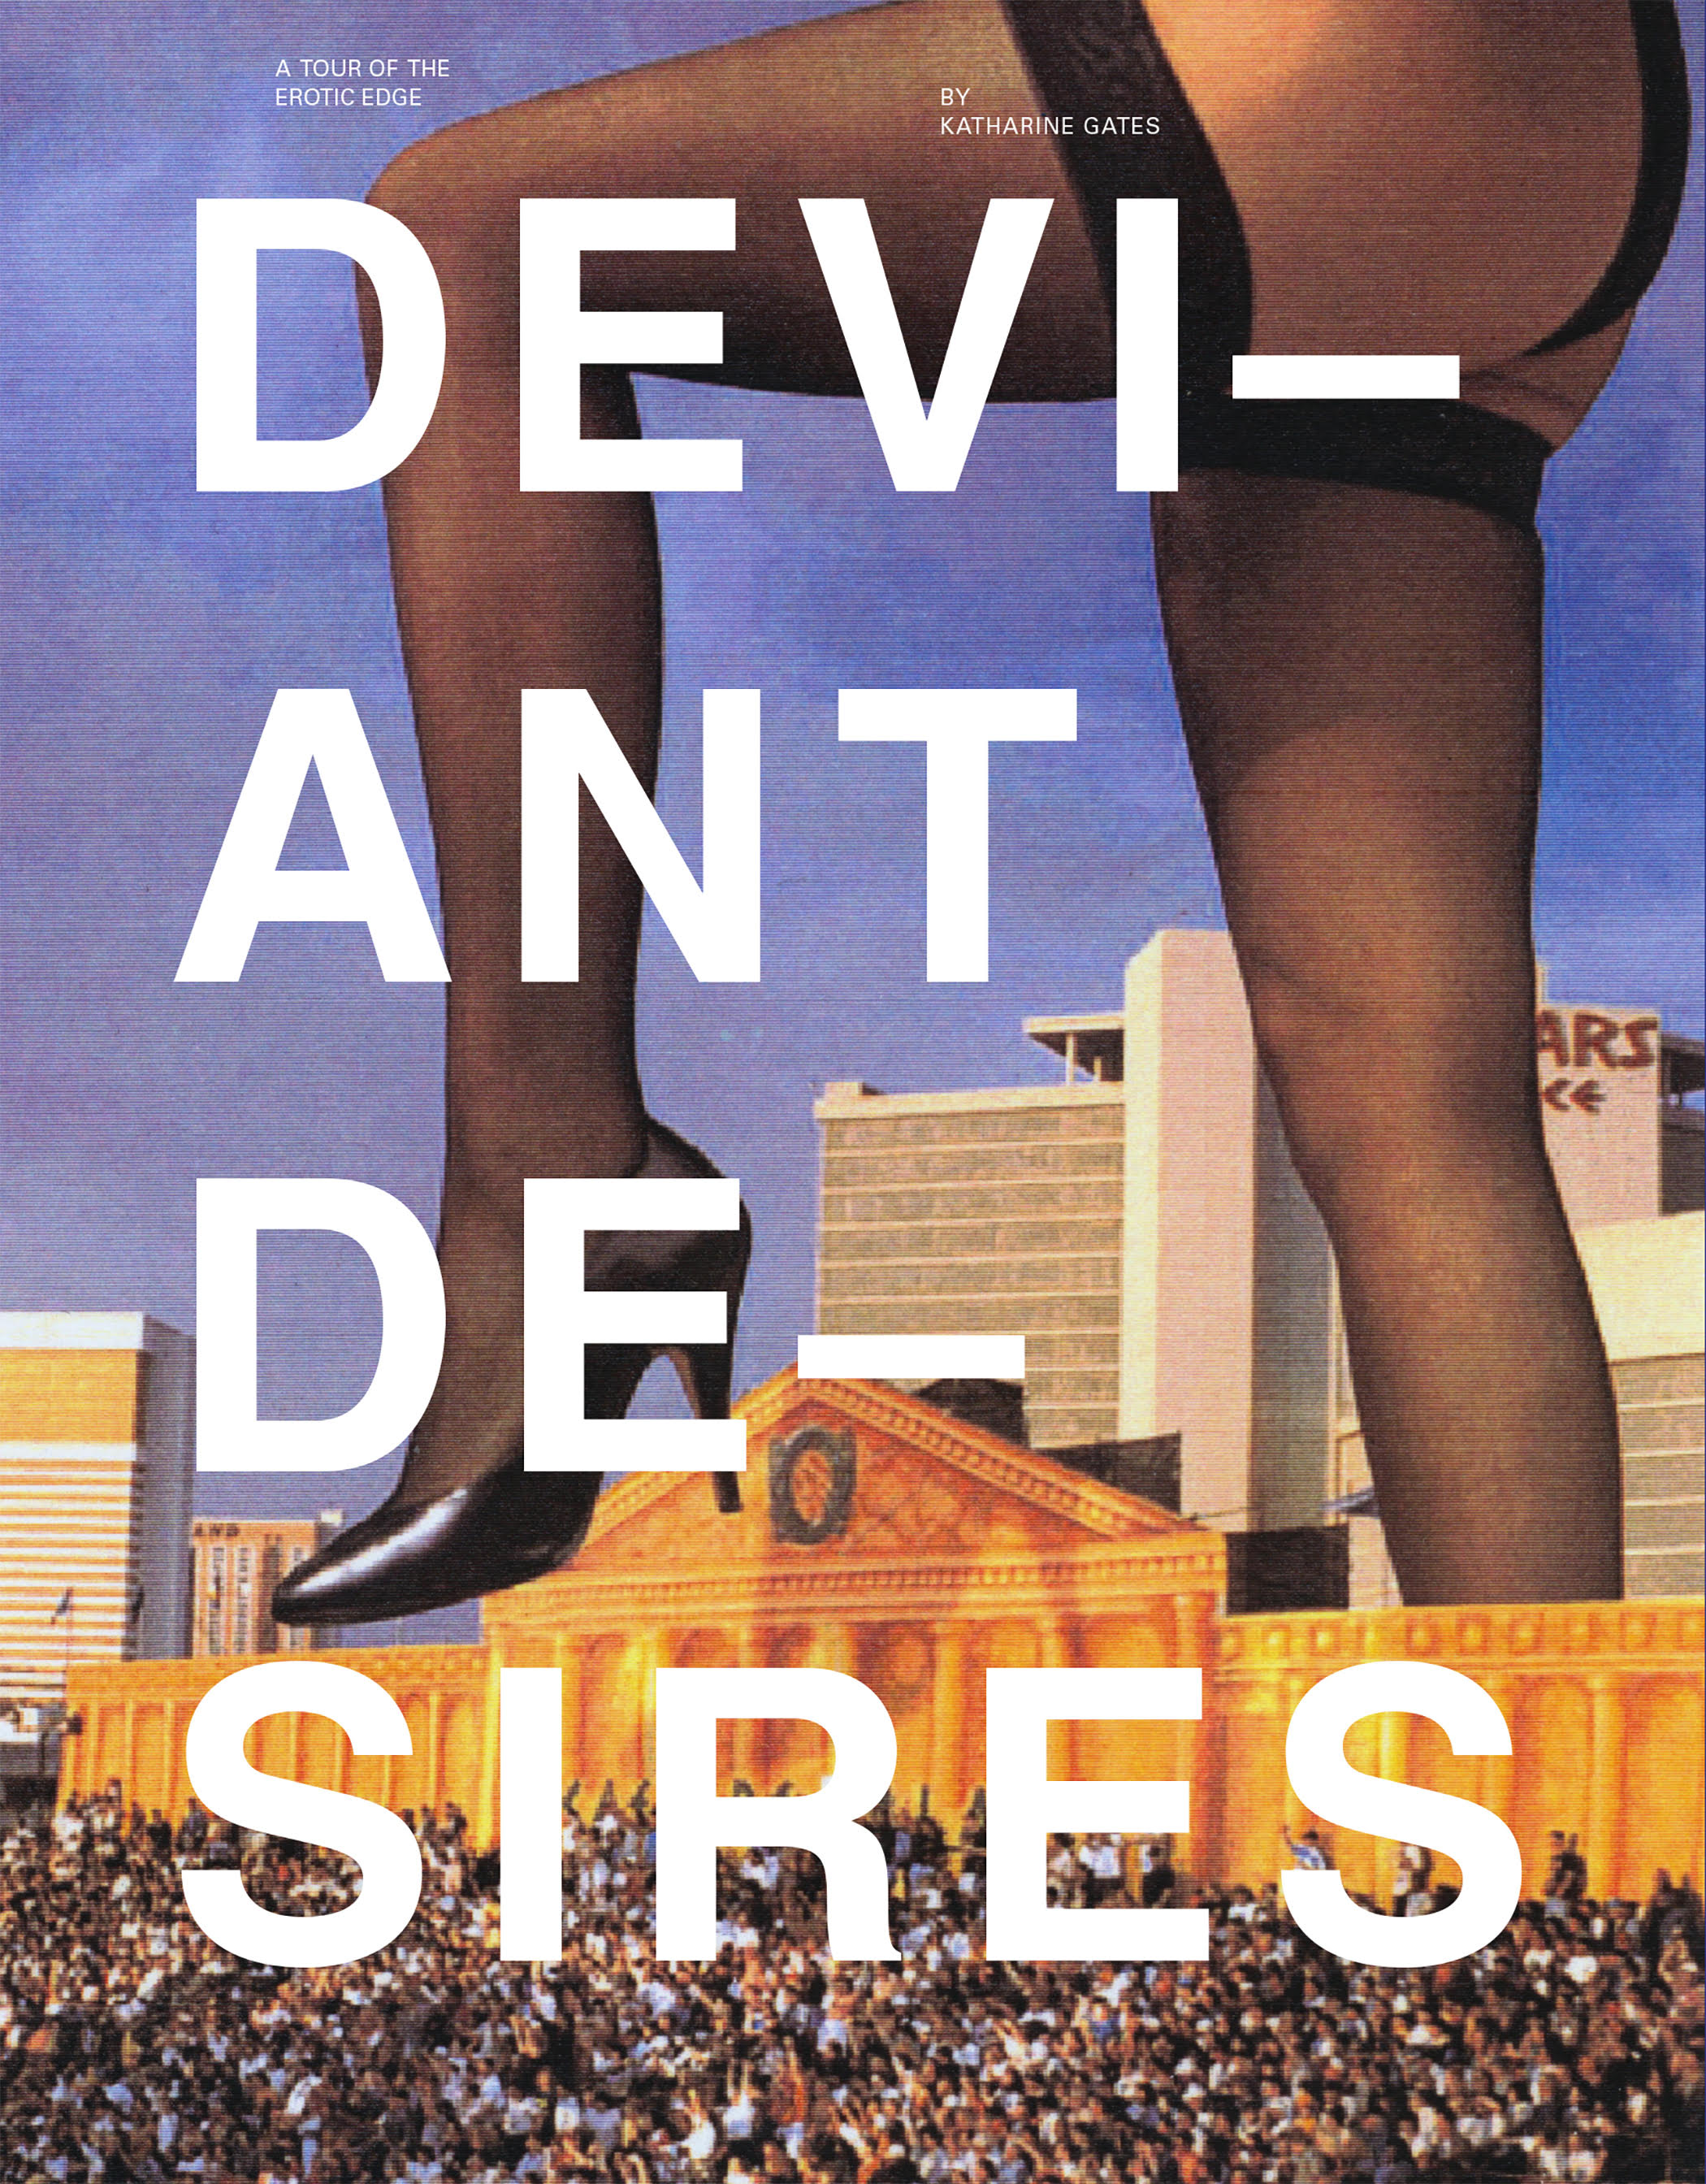 Valentine's Day Event: Deviant Desires: A Tour of the Erotic Edge by Katharine Gates — in conversation w/ Lizzi Sandell